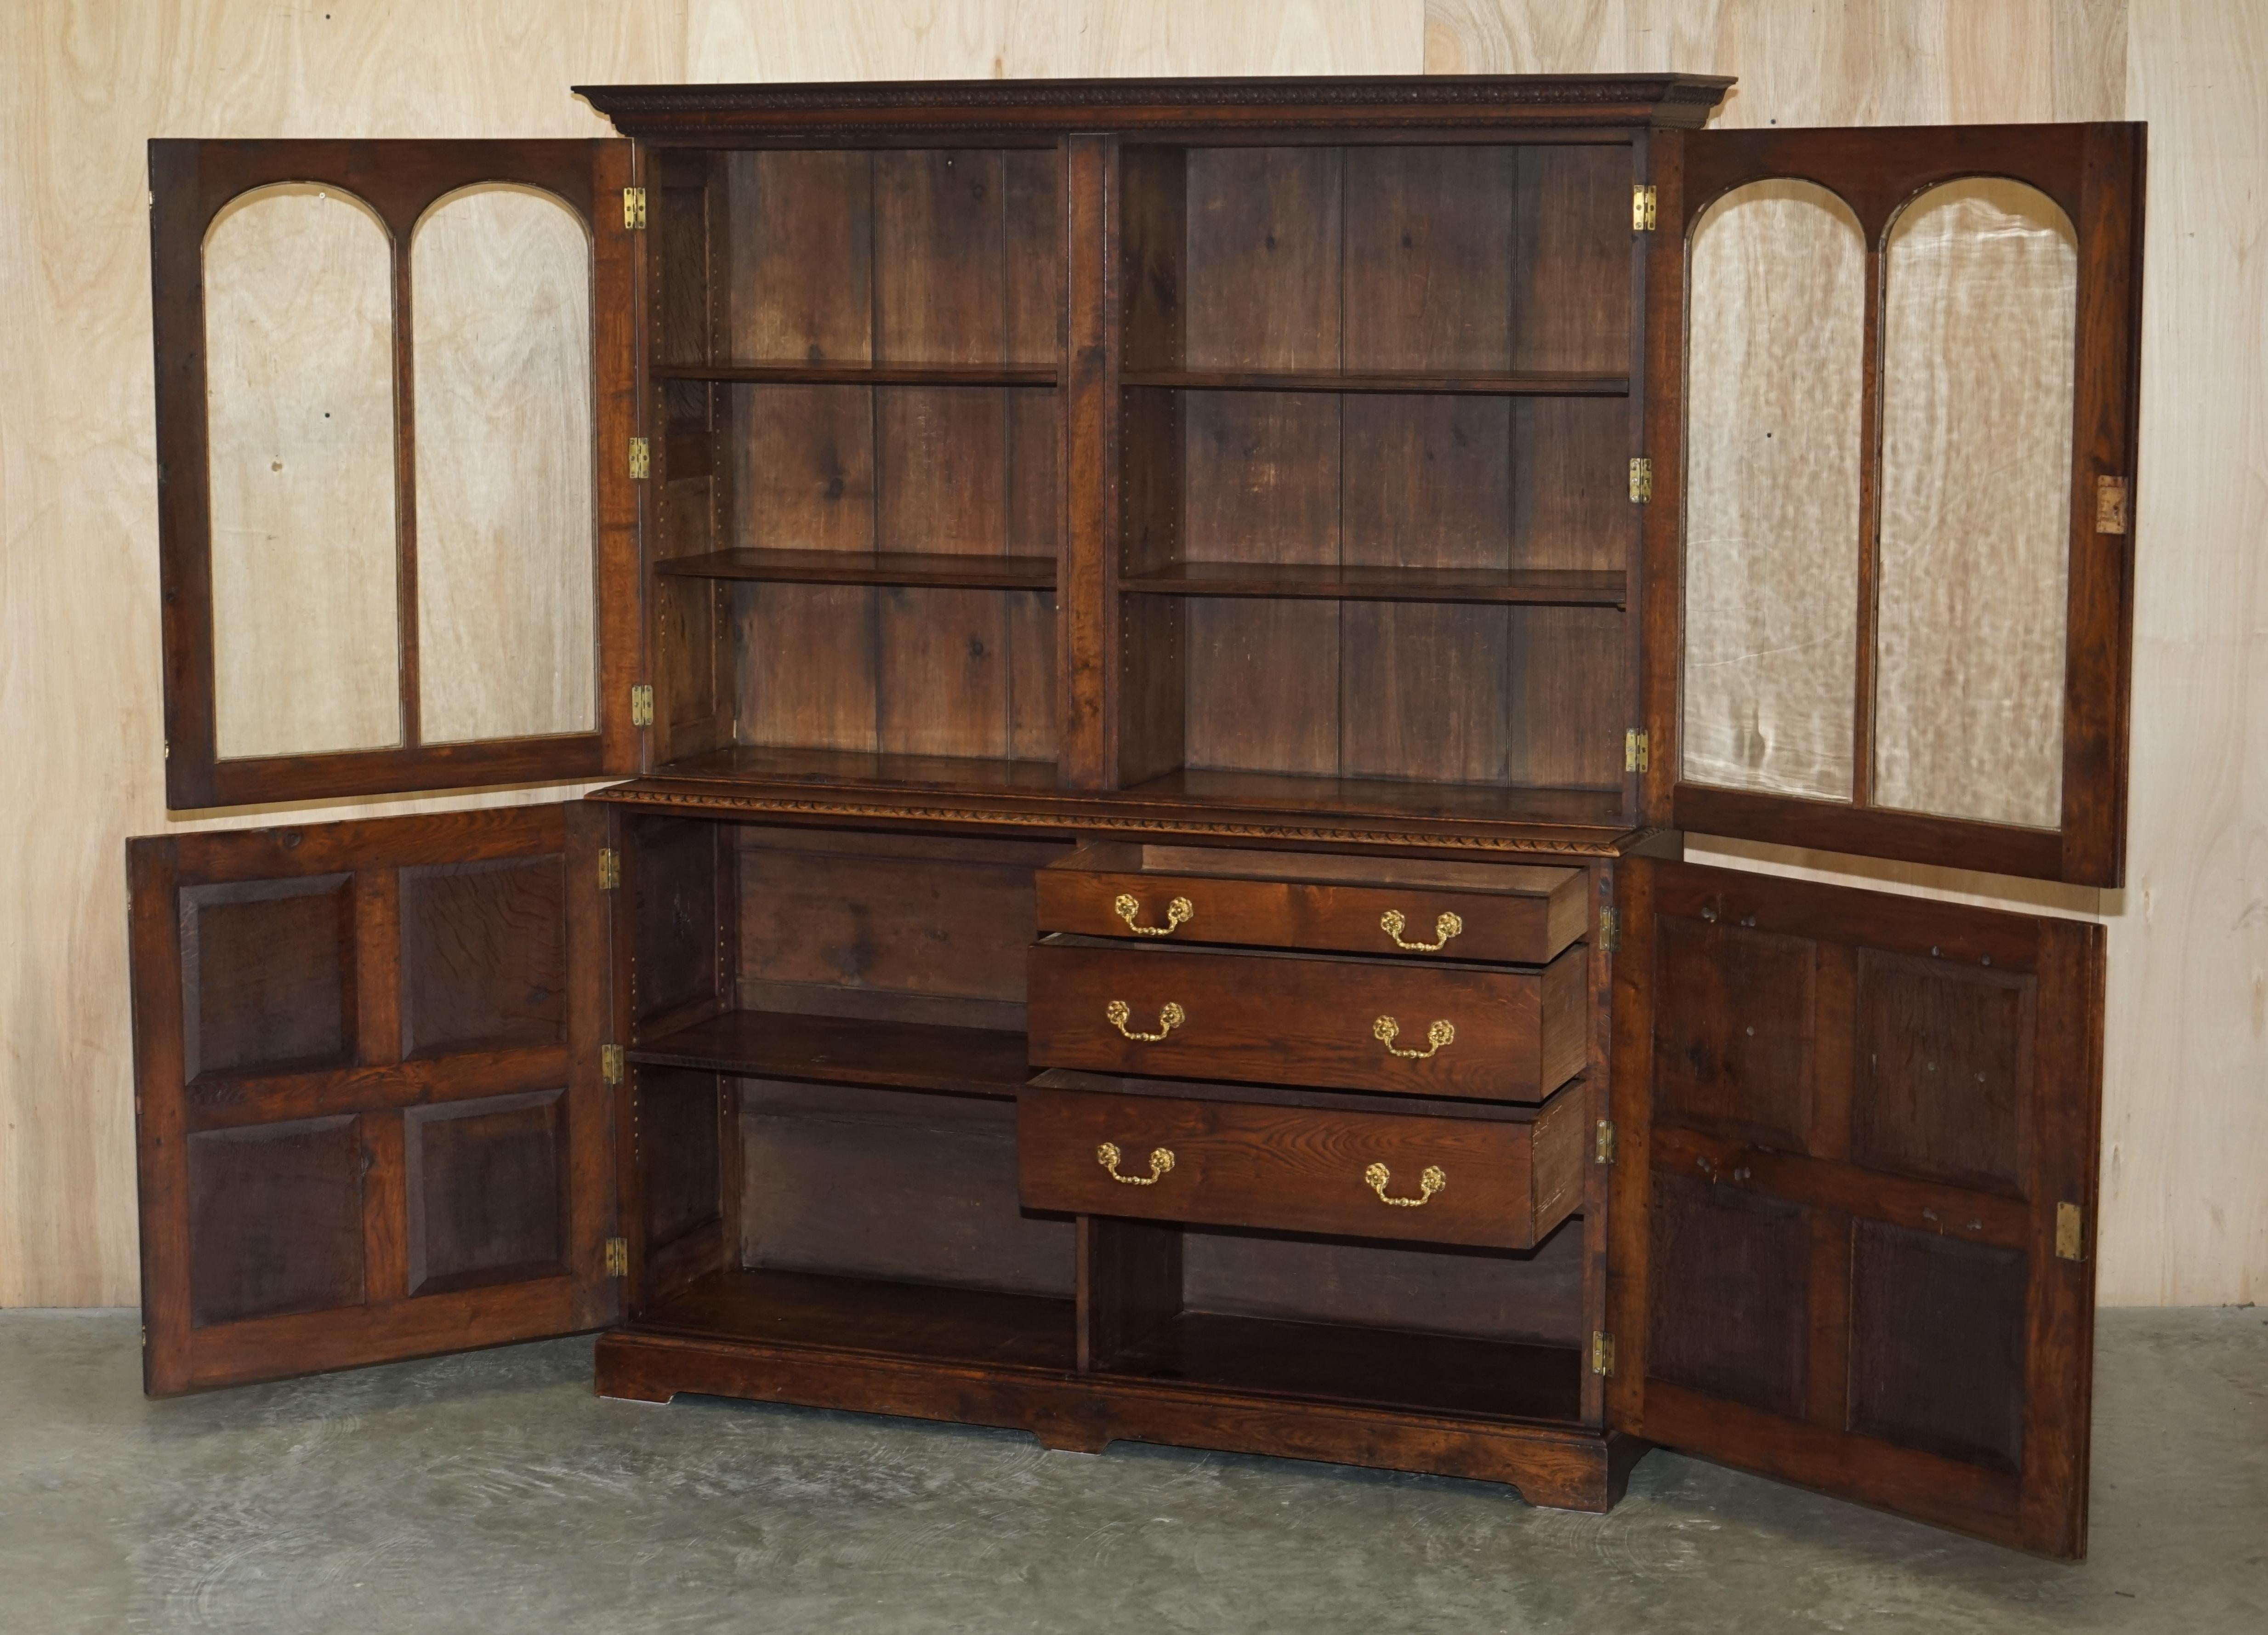 IMPORTANT CARVED BOOKCASE CABiNET FROM THE BATE COLLECTION IN OXFORD UNIVERSITY For Sale 10